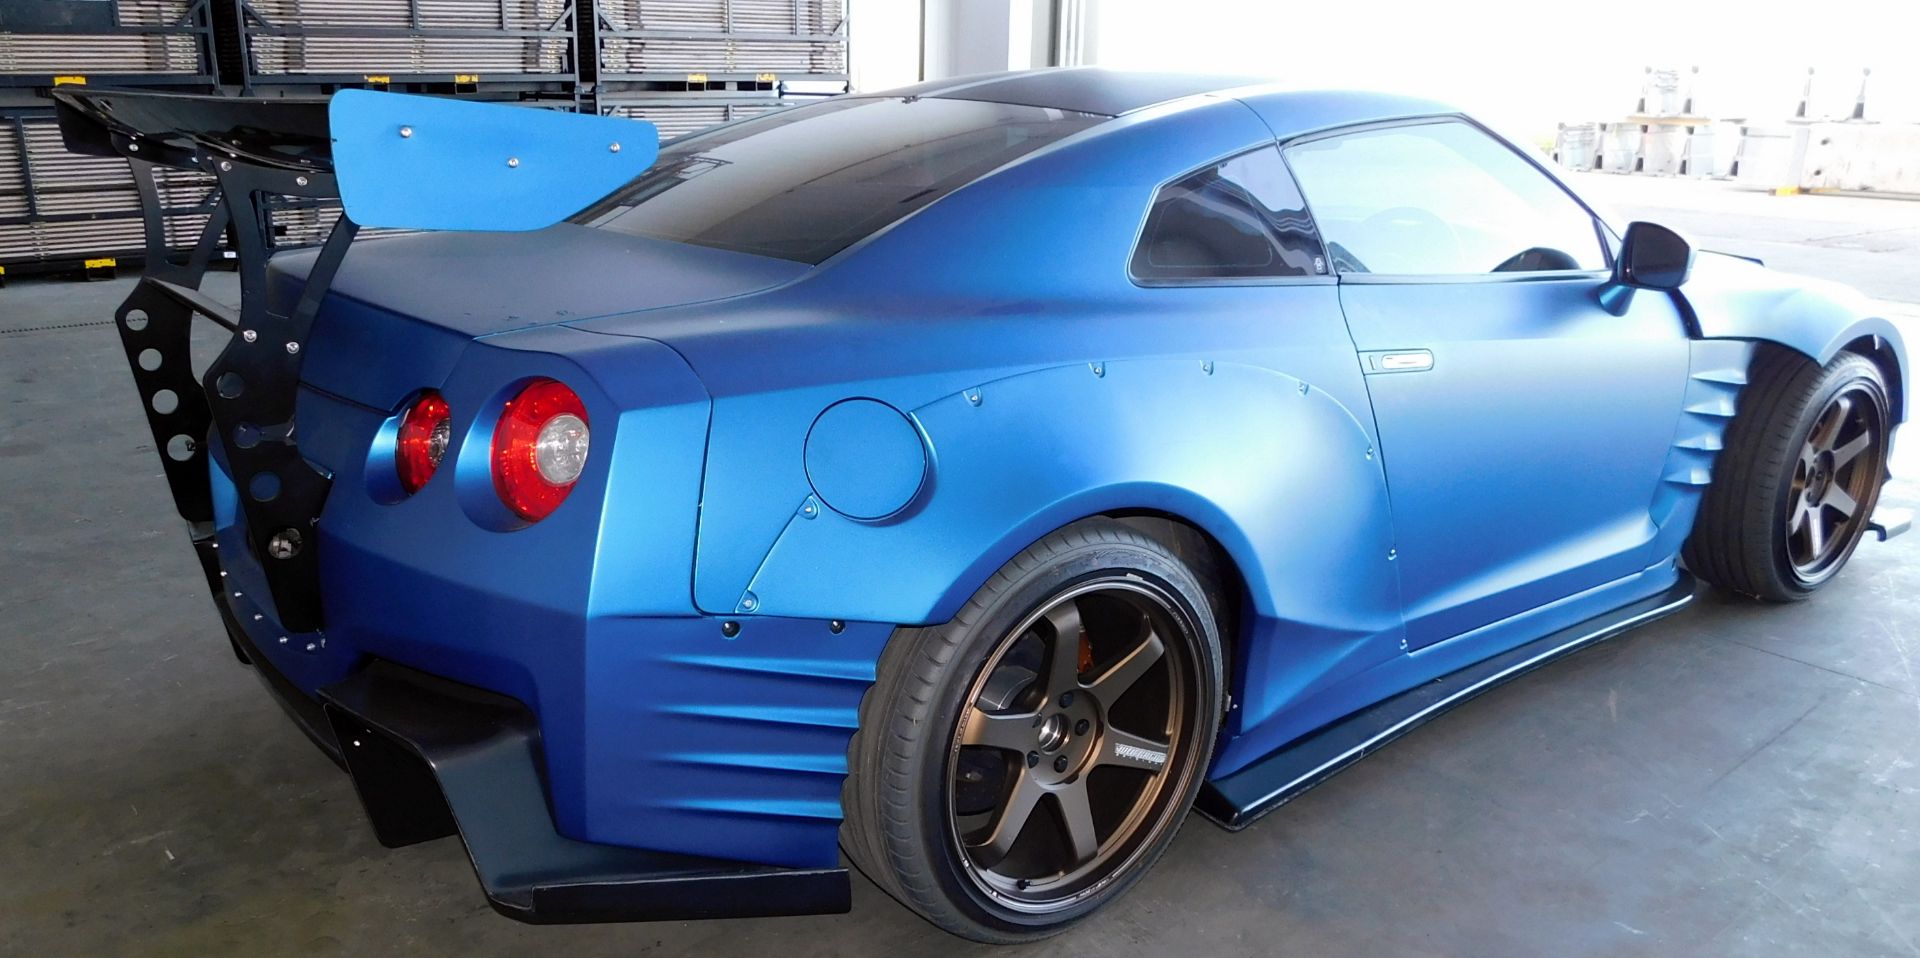 Nissan GTR 2 Door RHD Coupe, 3.8 Litre Engine, Manual Gearbox, Bensopera Body Kit, Not Road Legal, - Image 5 of 12